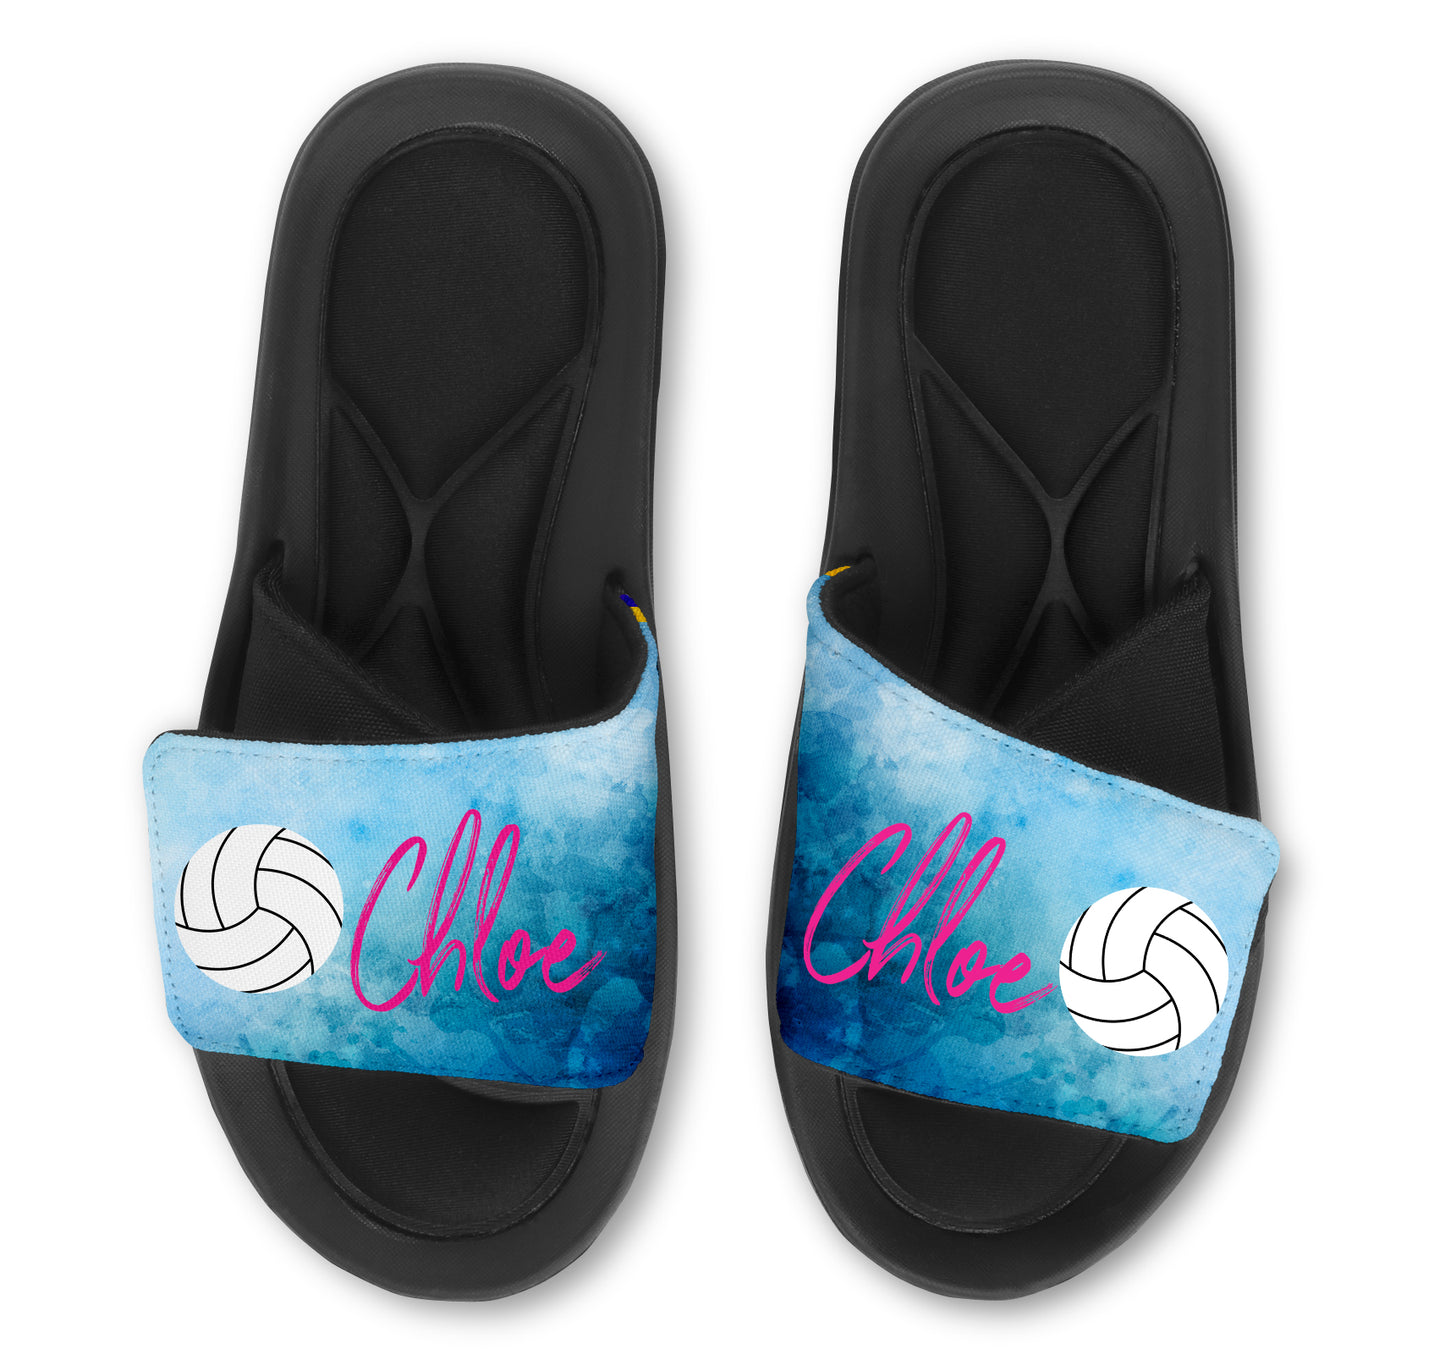 Volleyball Custom Slides / Sandals - Watercolor